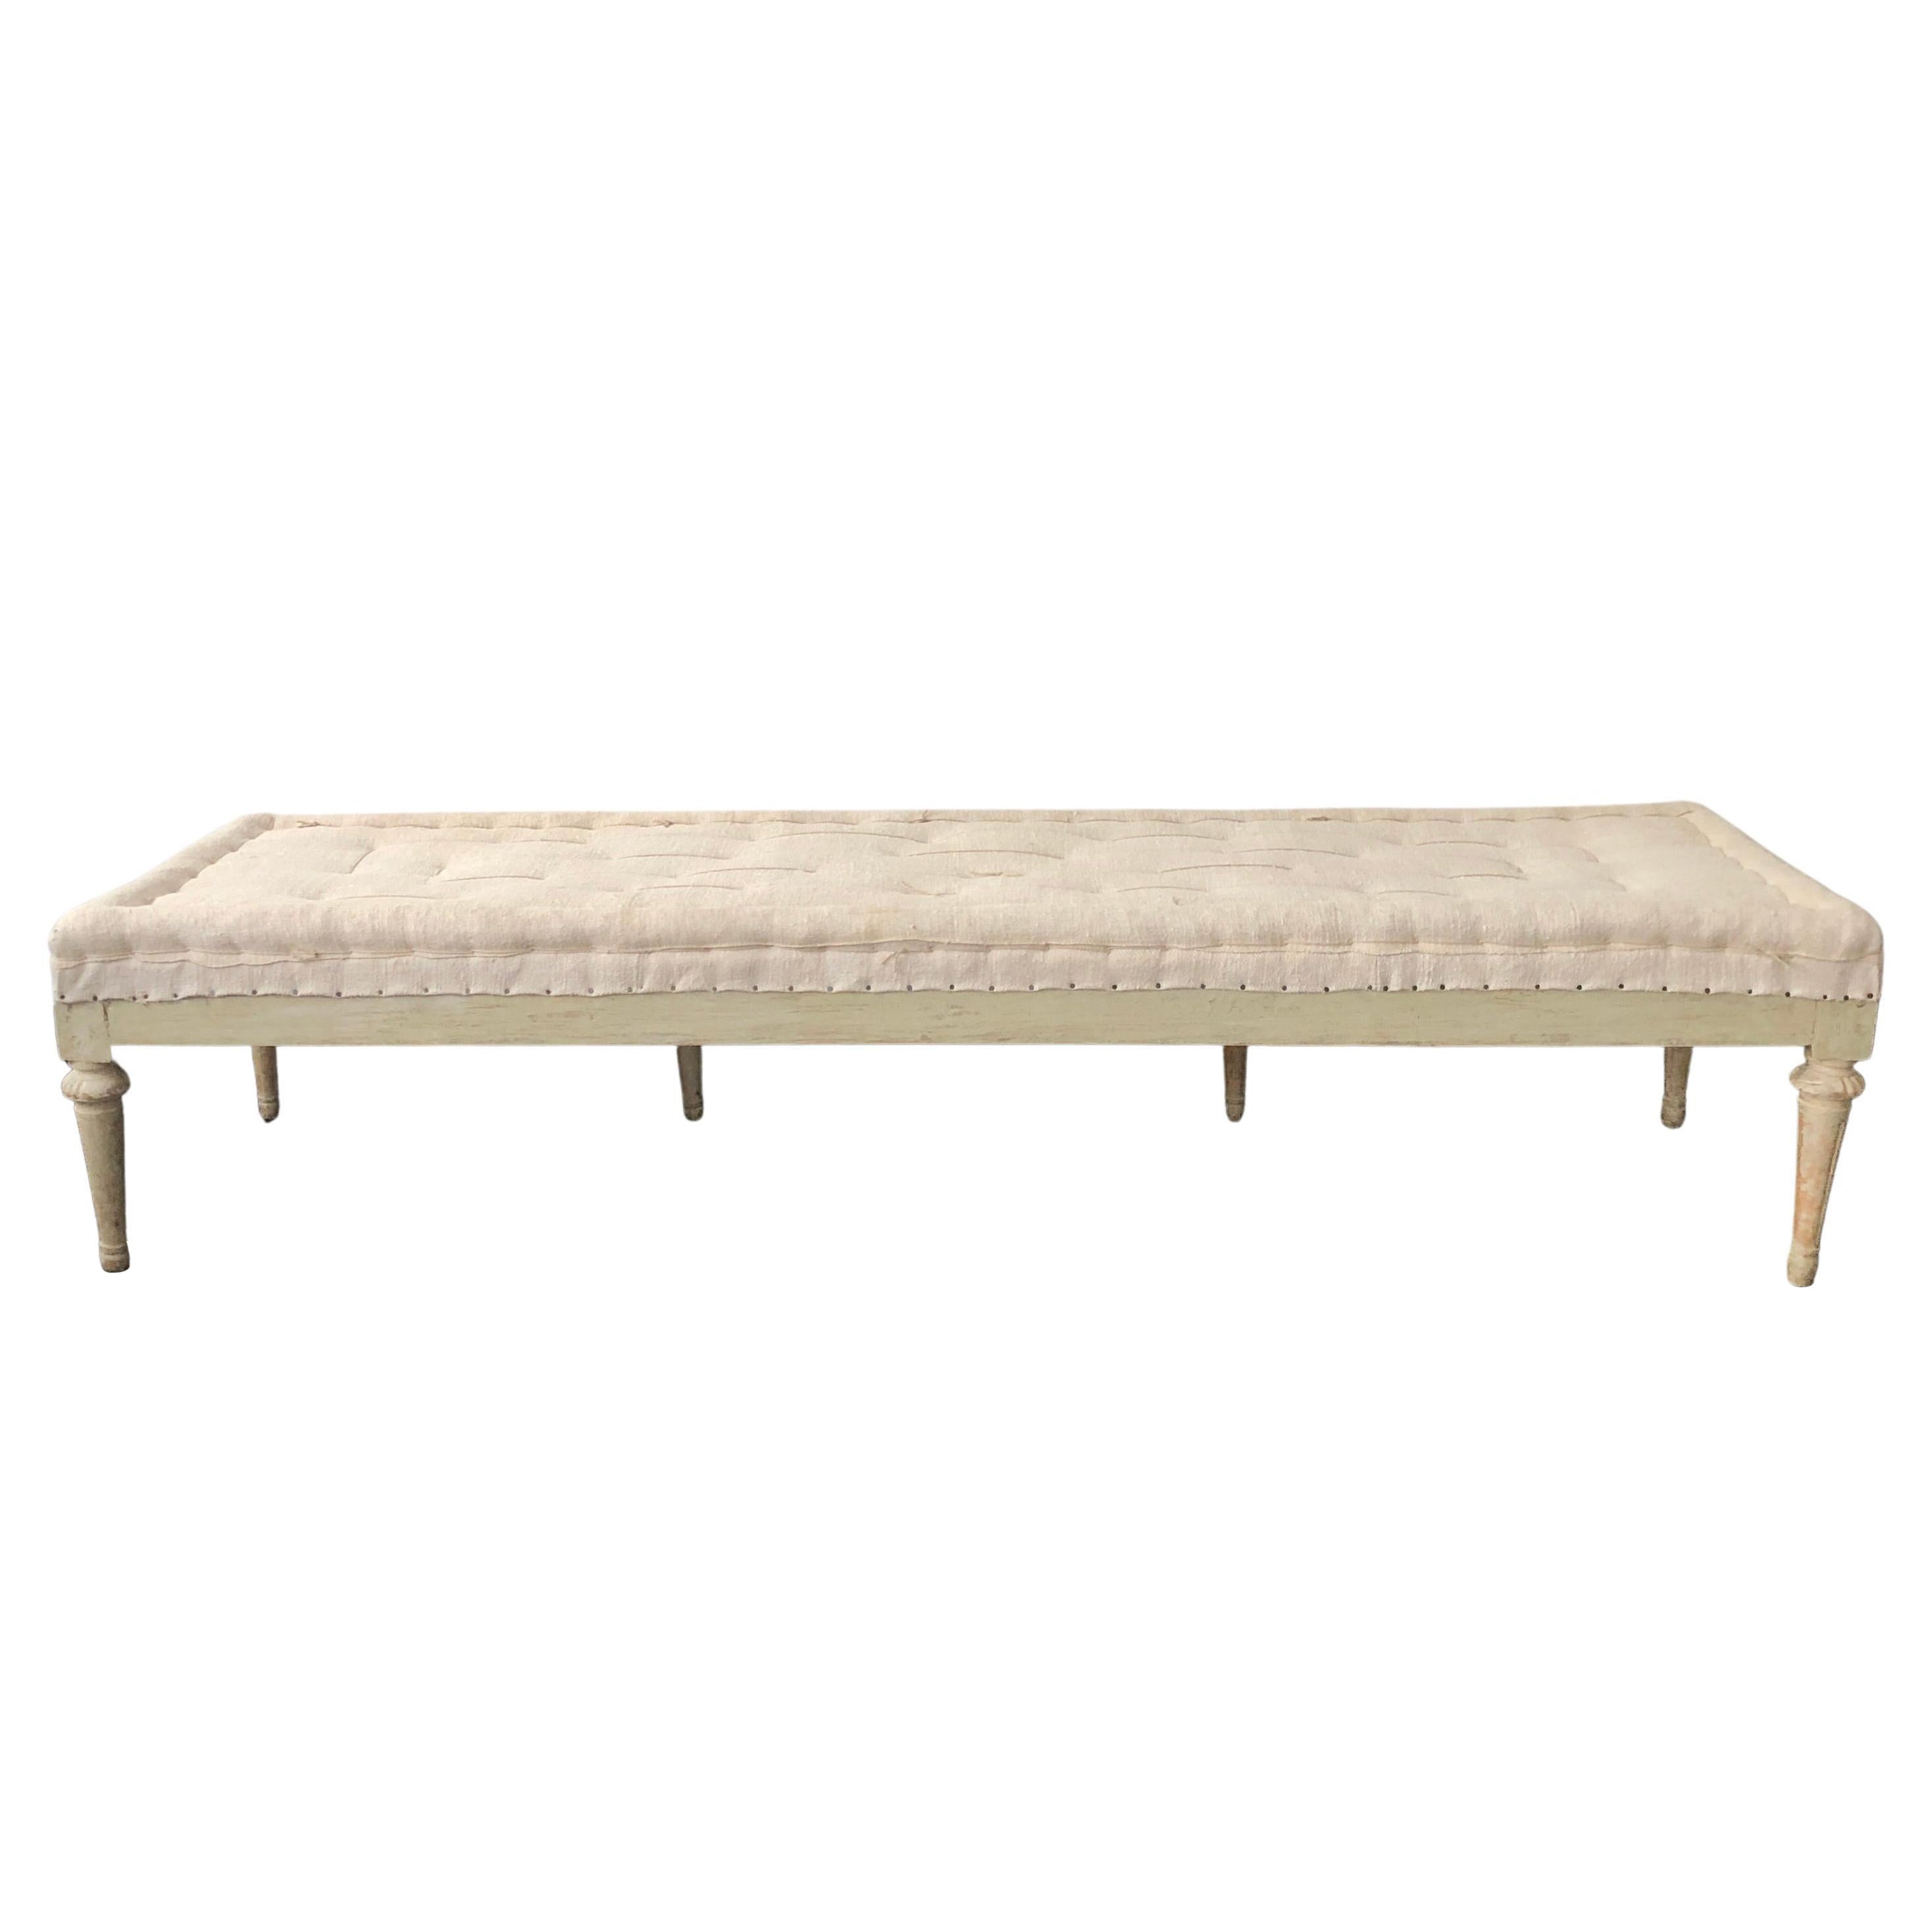 Swedish 18th century Gustavian Period Bench with Antique Linen